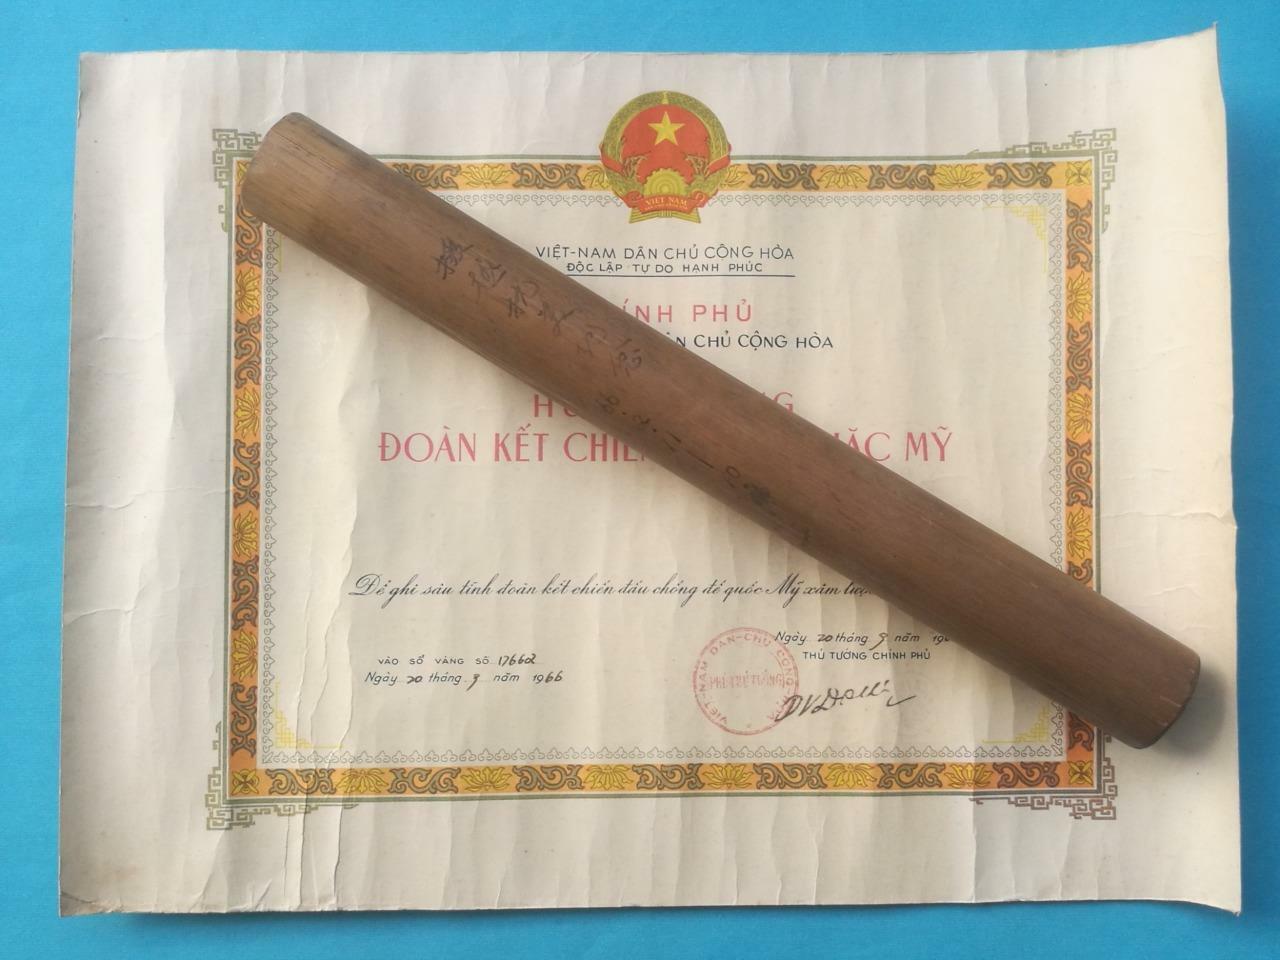 Vietnam War Solidarity Against US Aggression Medal Doc in Bamboo Tube Dated 966